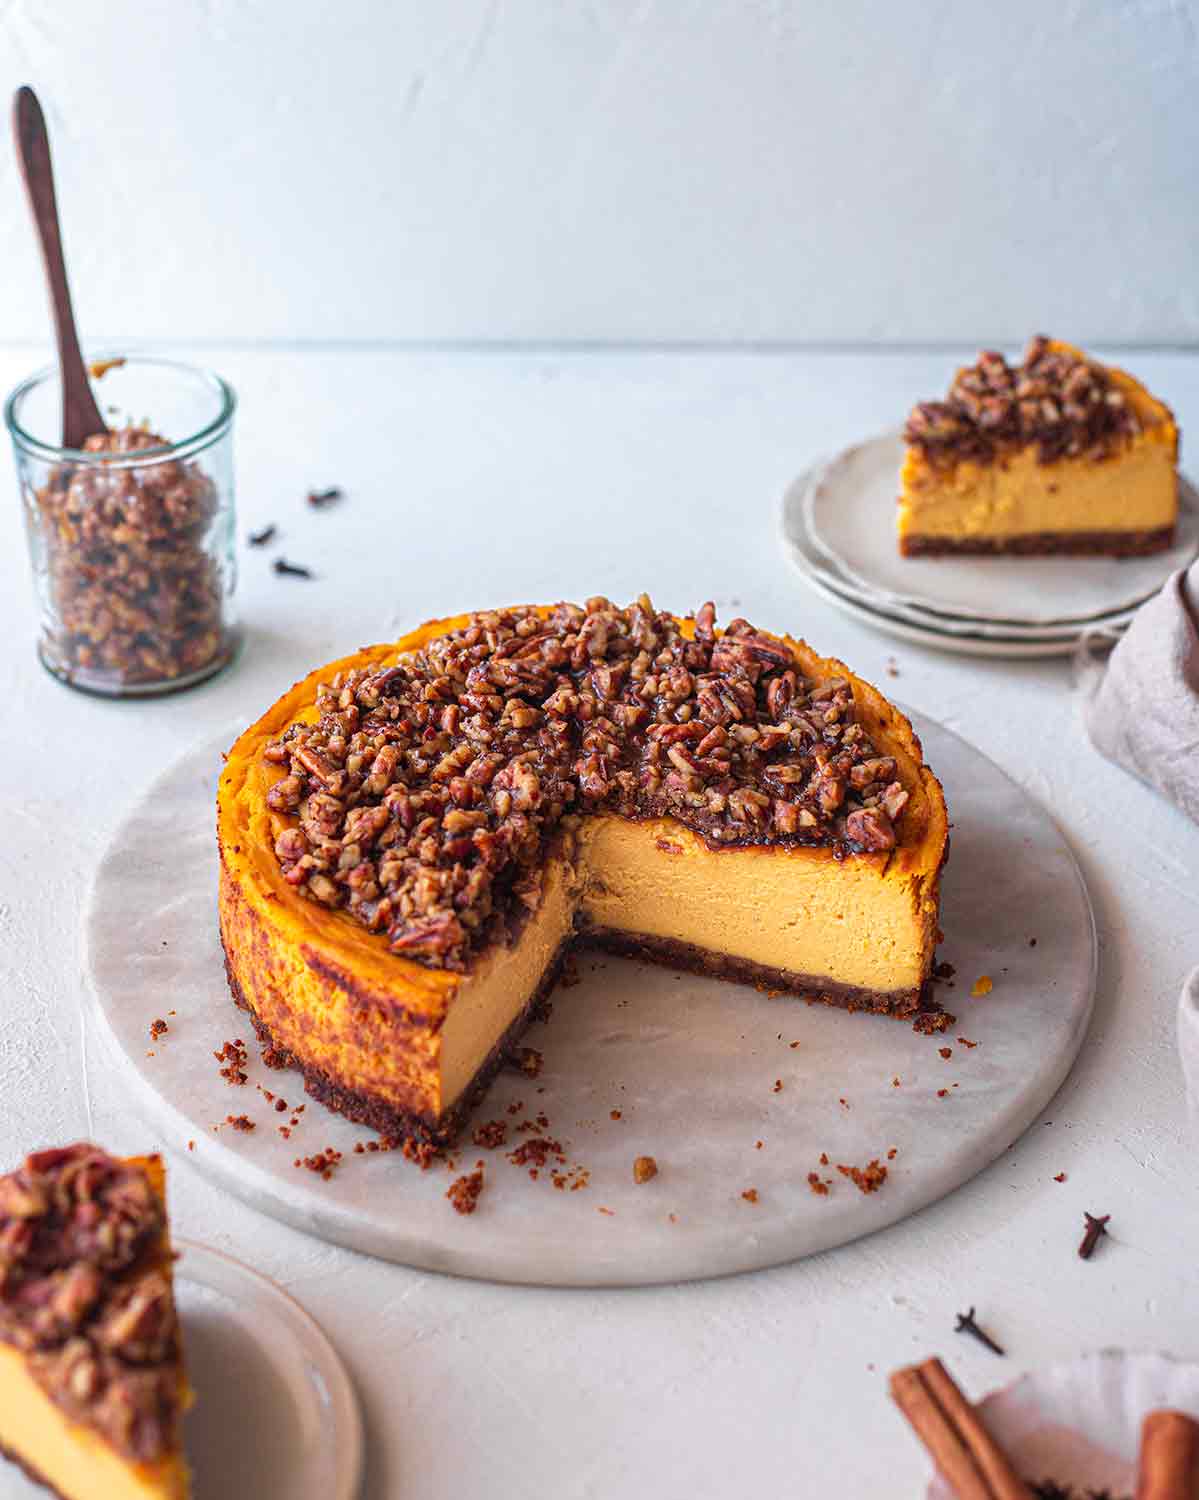 Cross section of baked vegan pumpkin cheesecake with a pecan crumble on a serving platter.